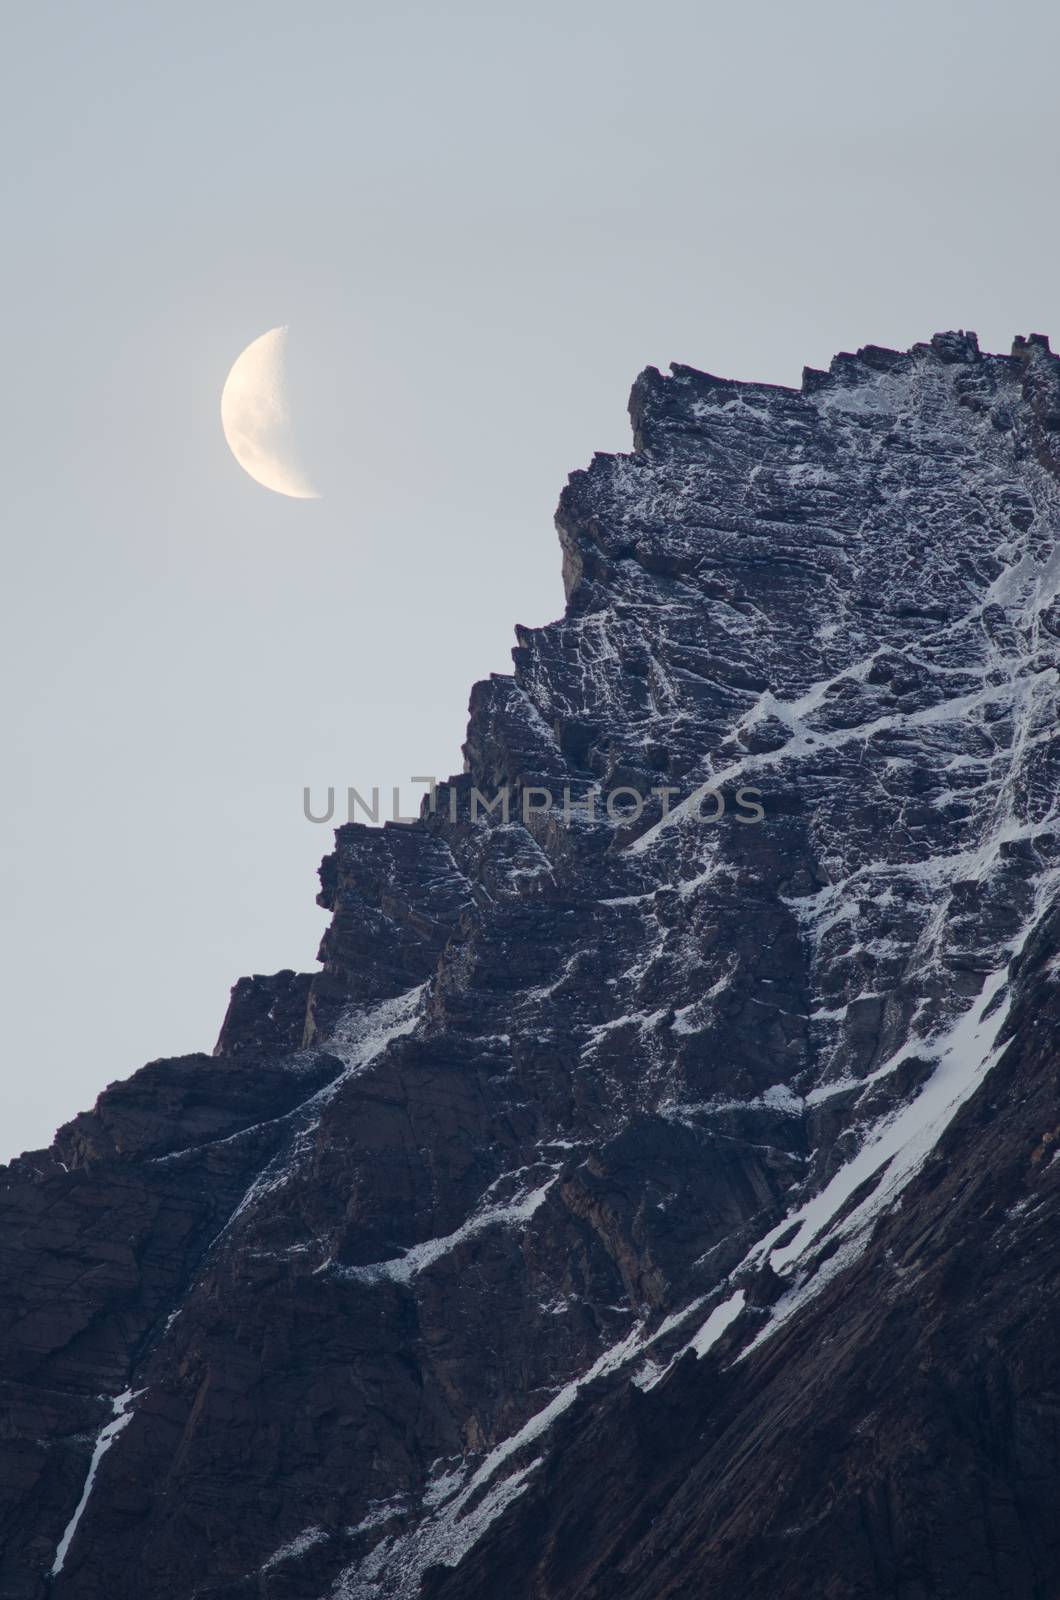 Moon on a cliff in the Torres del Paine National Park. Ultima Esperanza Province. Magallanes and Chilean Antarctic Region. Chile.